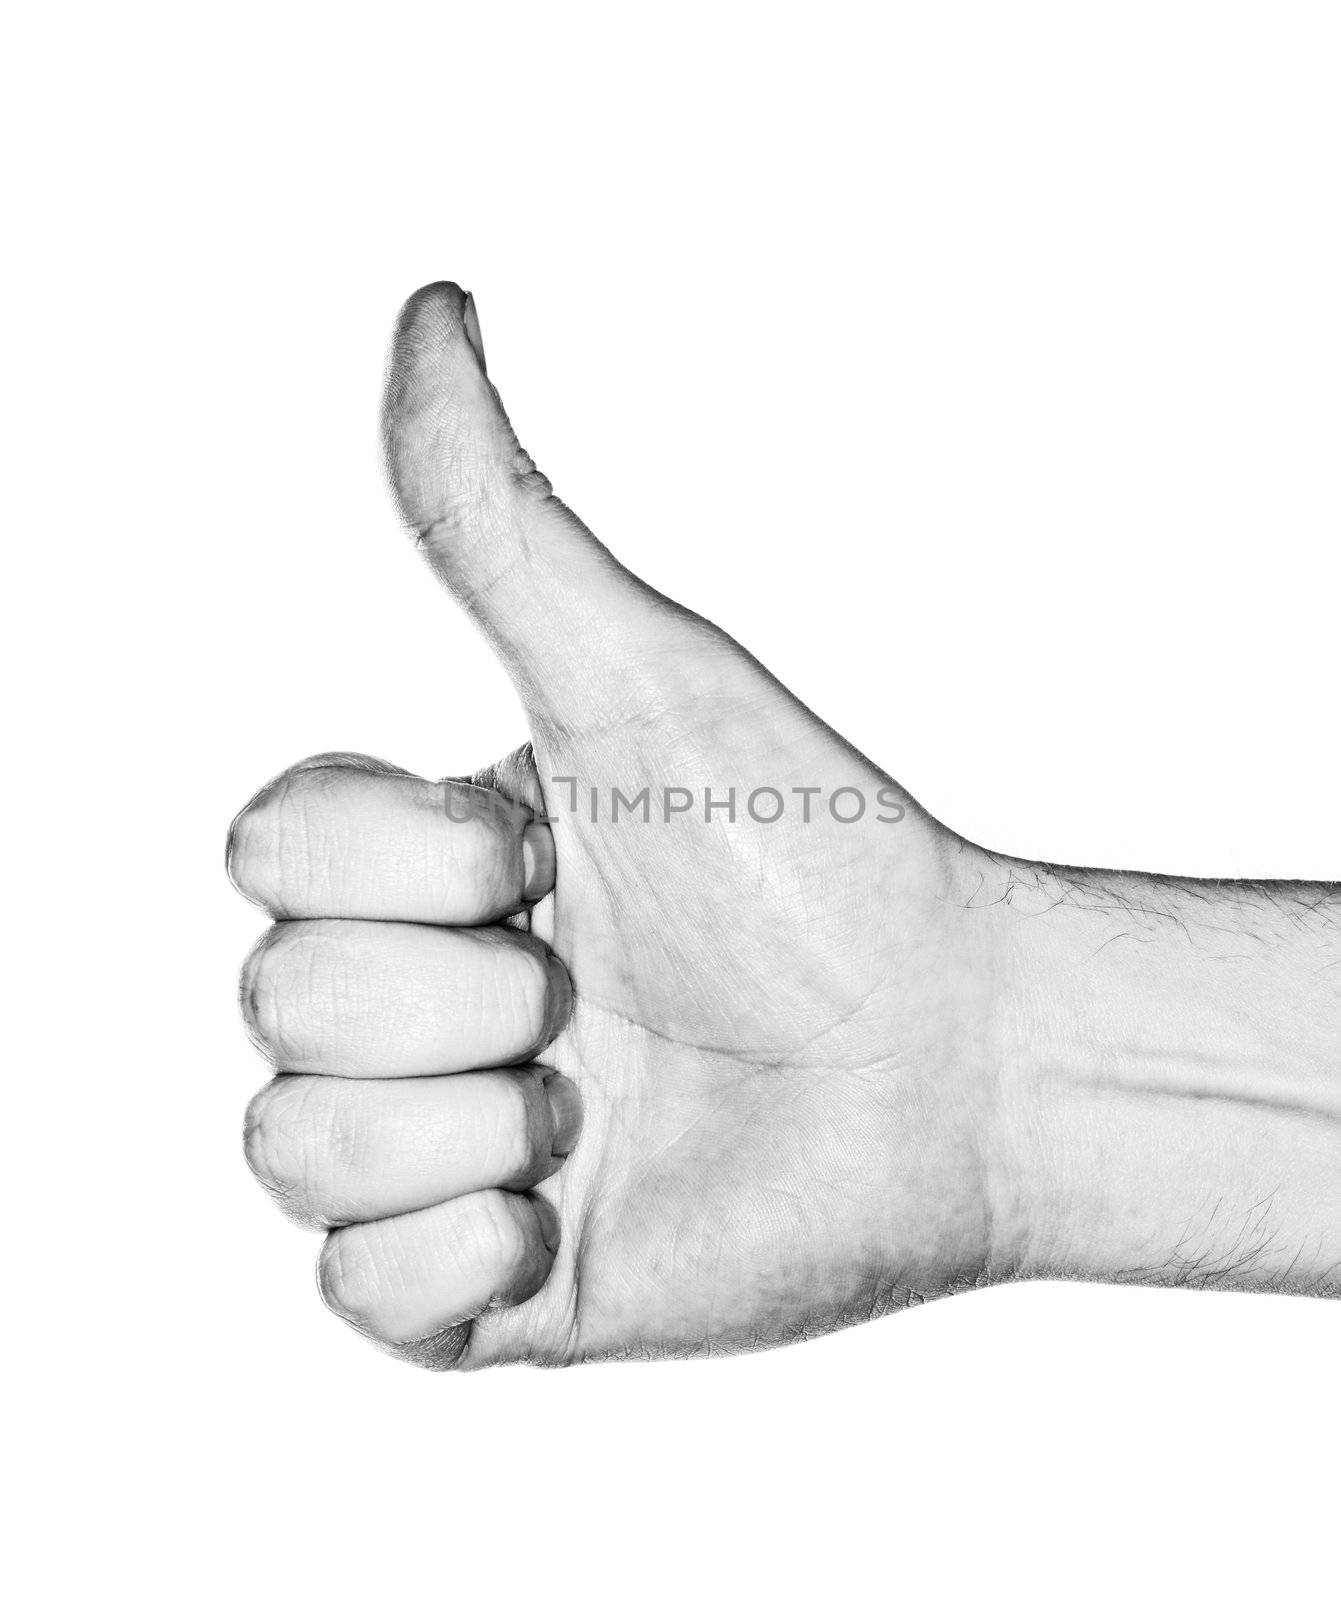 Black and white image of a hand making a "thumb up" gesture. Photographed with ring flash.